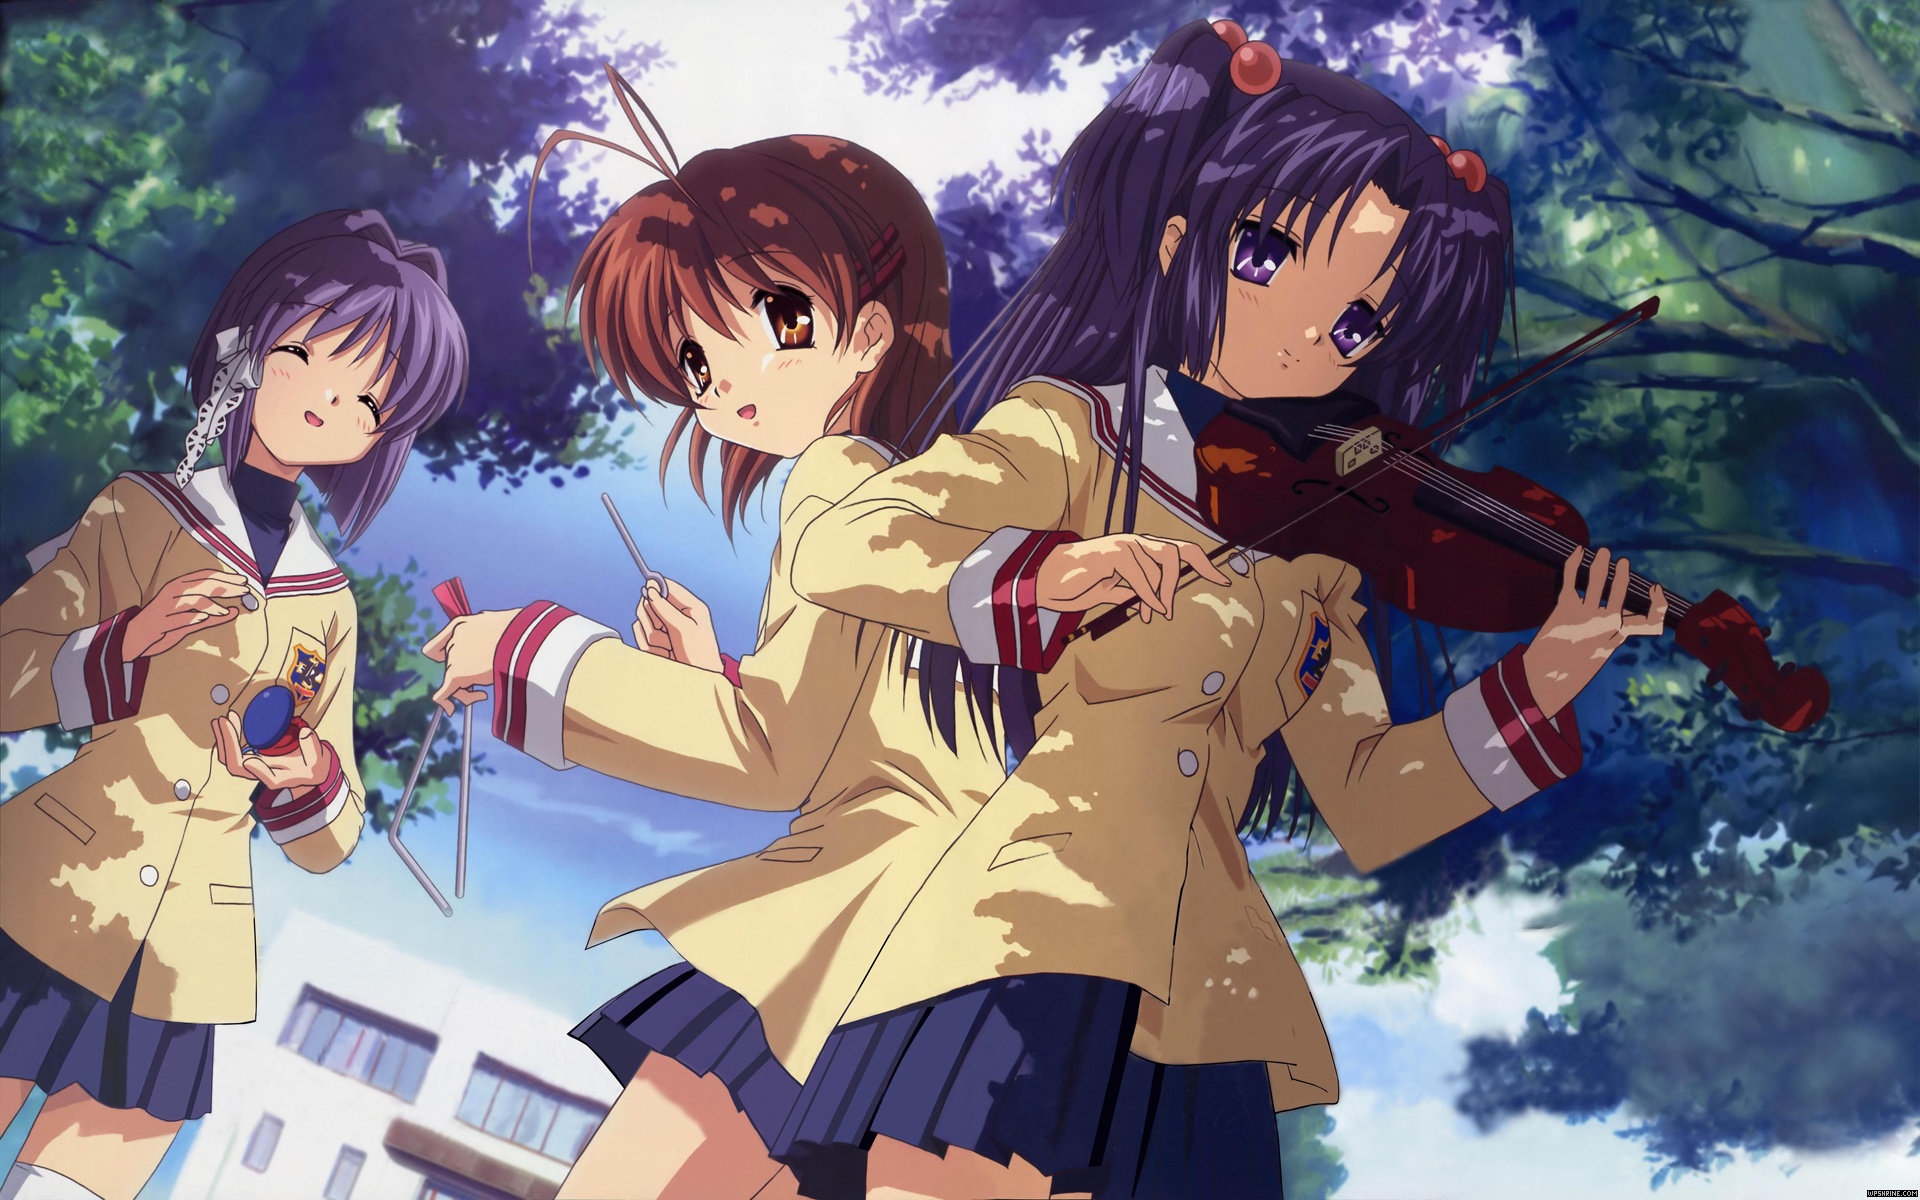 Free Download Clannad Pics Clannad And Clannad After Story Wallpaper 19x10 For Your Desktop Mobile Tablet Explore 76 Clannad After Story Wallpaper Dango Wallpaper